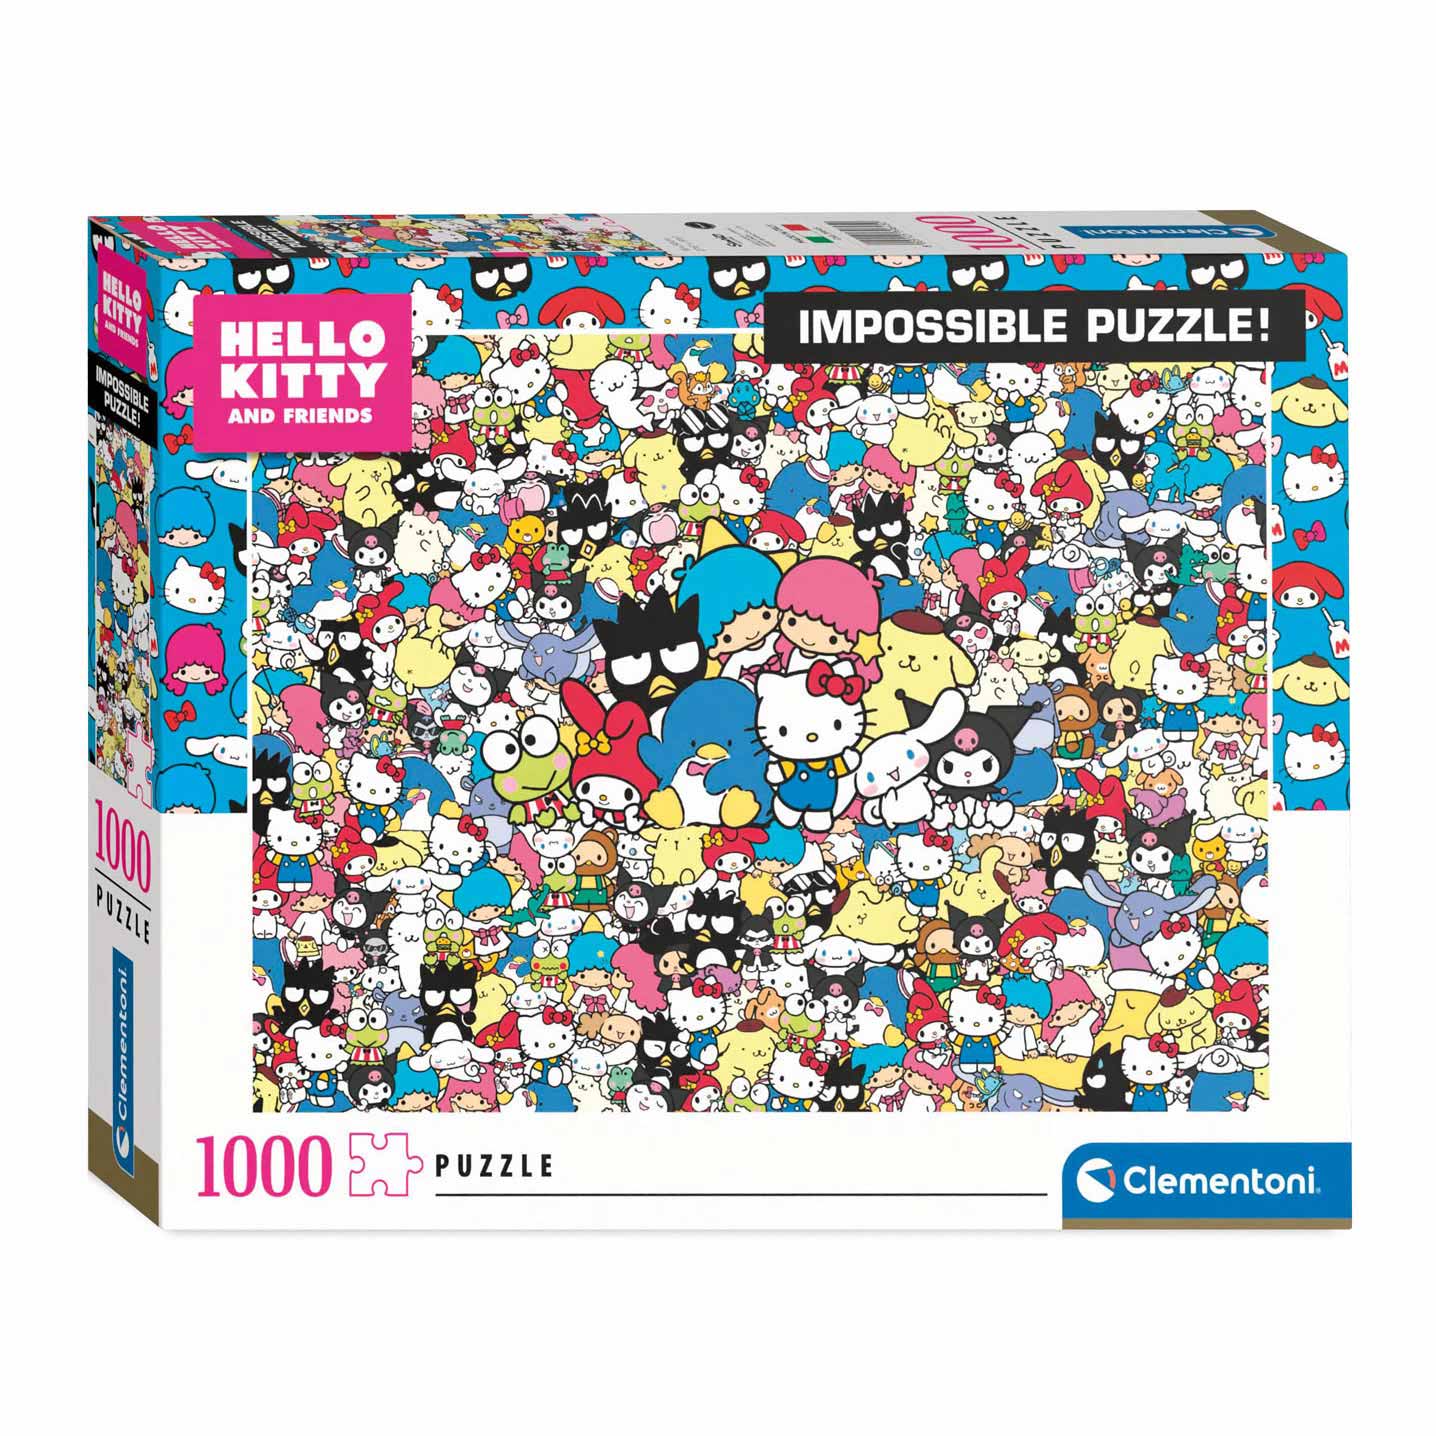 Clementoni Impossible Puzzle Hello Kitty, 1000 Teile.